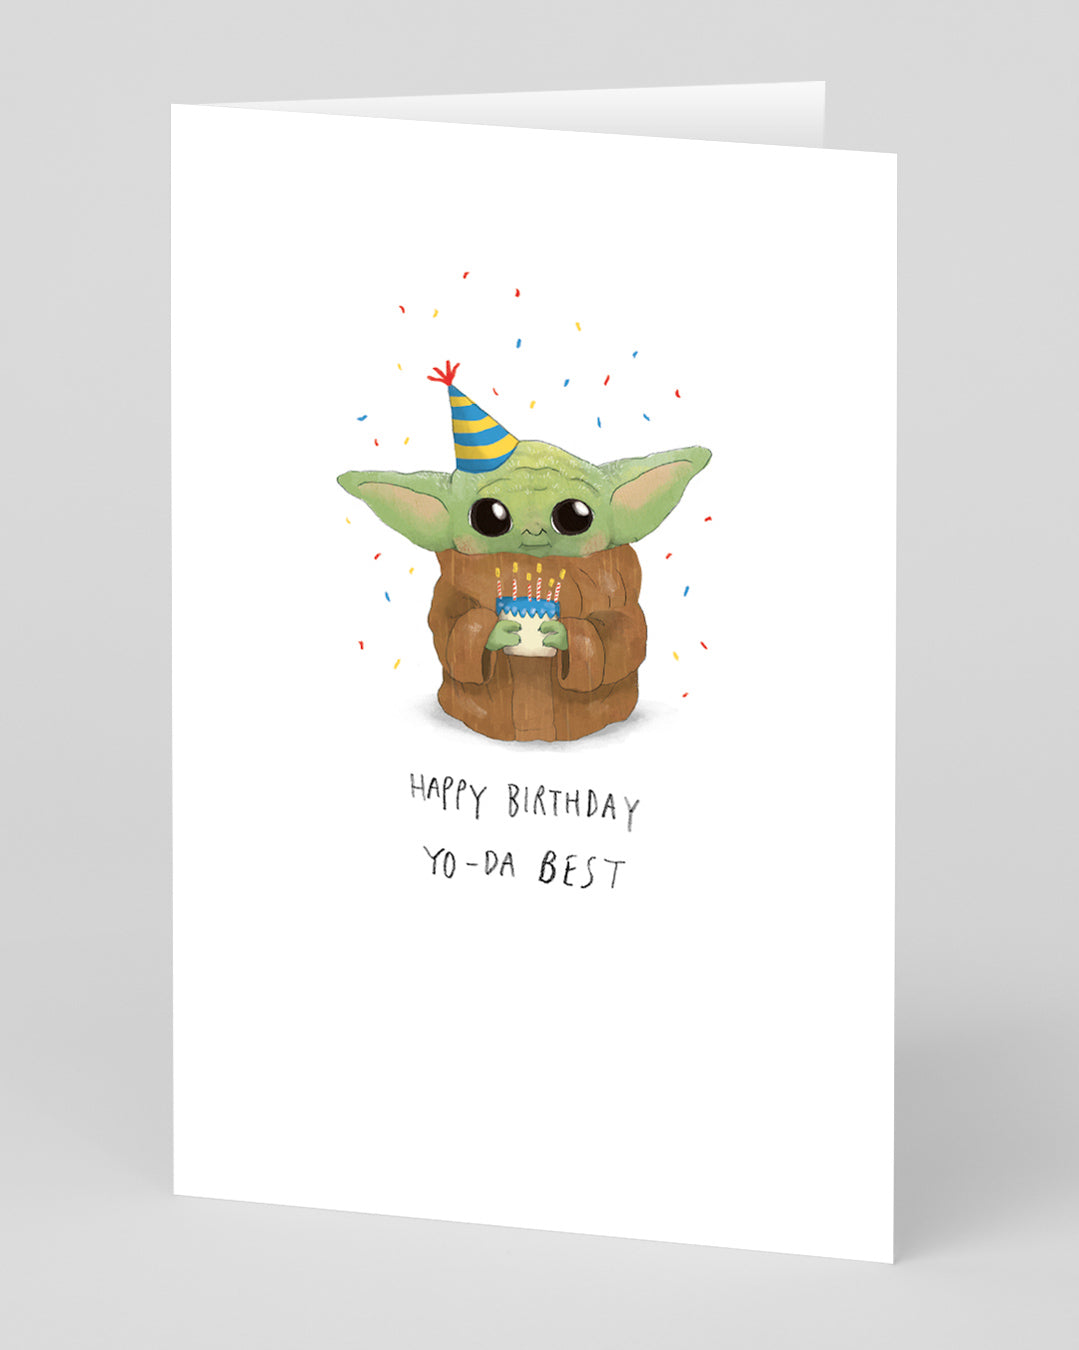 A birthday card with baby yoda from The Mandalorian on